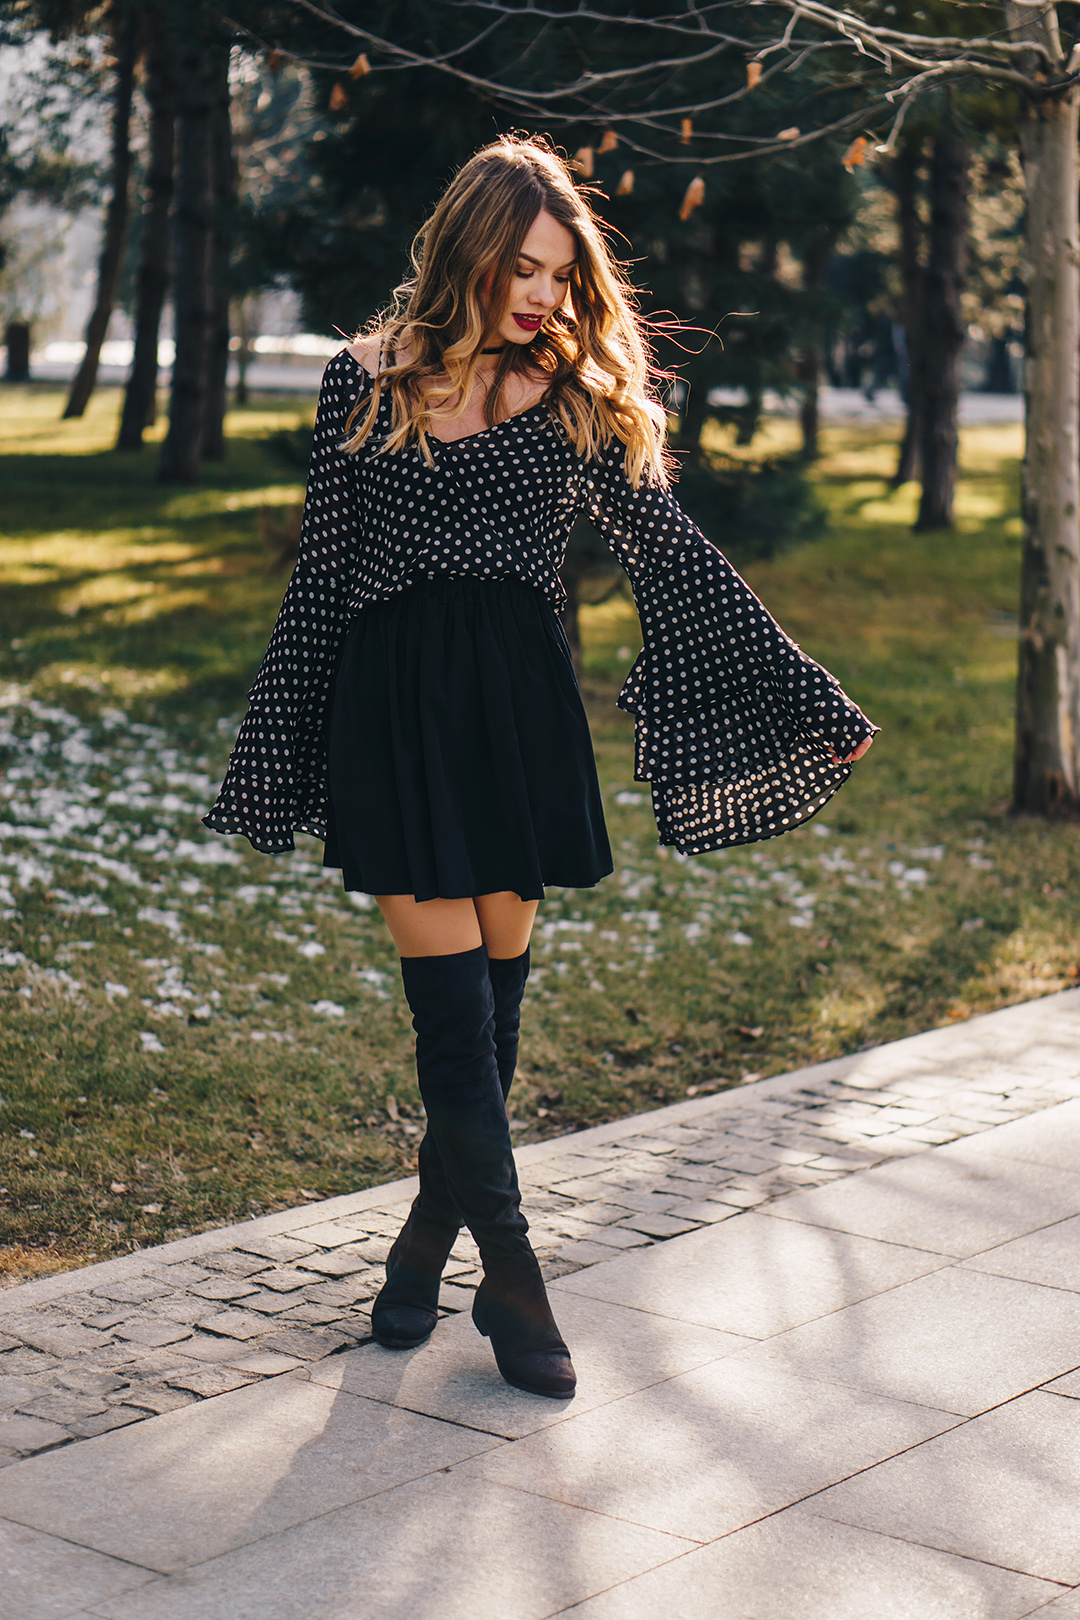 polka-dots-bell-sleeves-blouse-otk-boots-winter-outfit-5